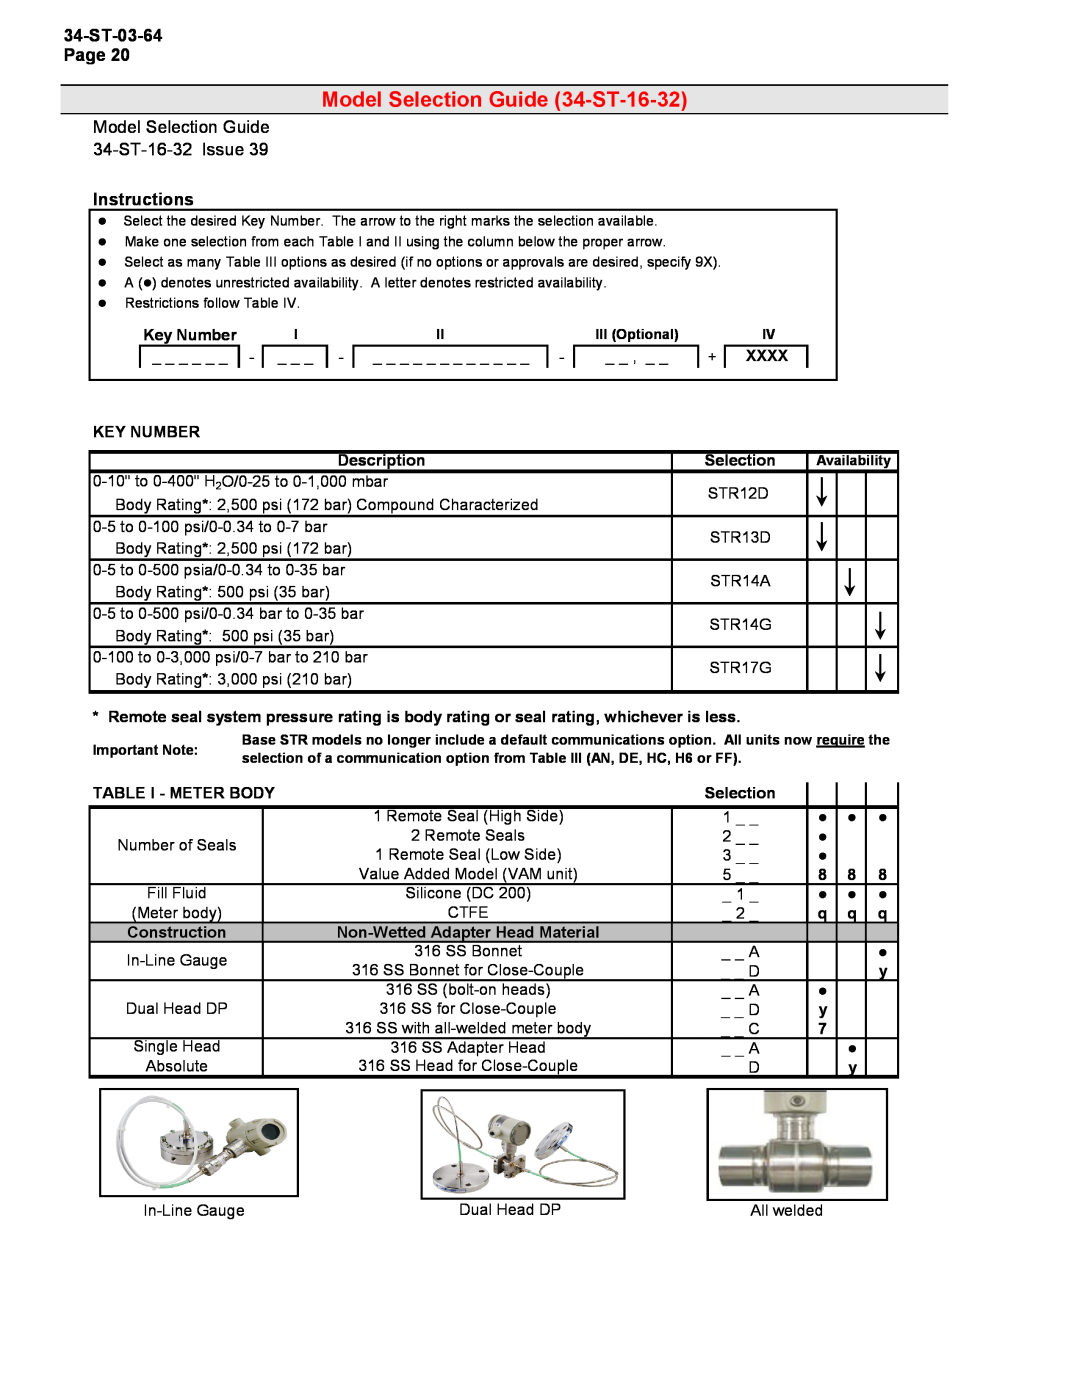 Honeywell STR12D warranty Model Selection Guide 34-ST-16-32, 34-ST-03-64Page, Instructions 